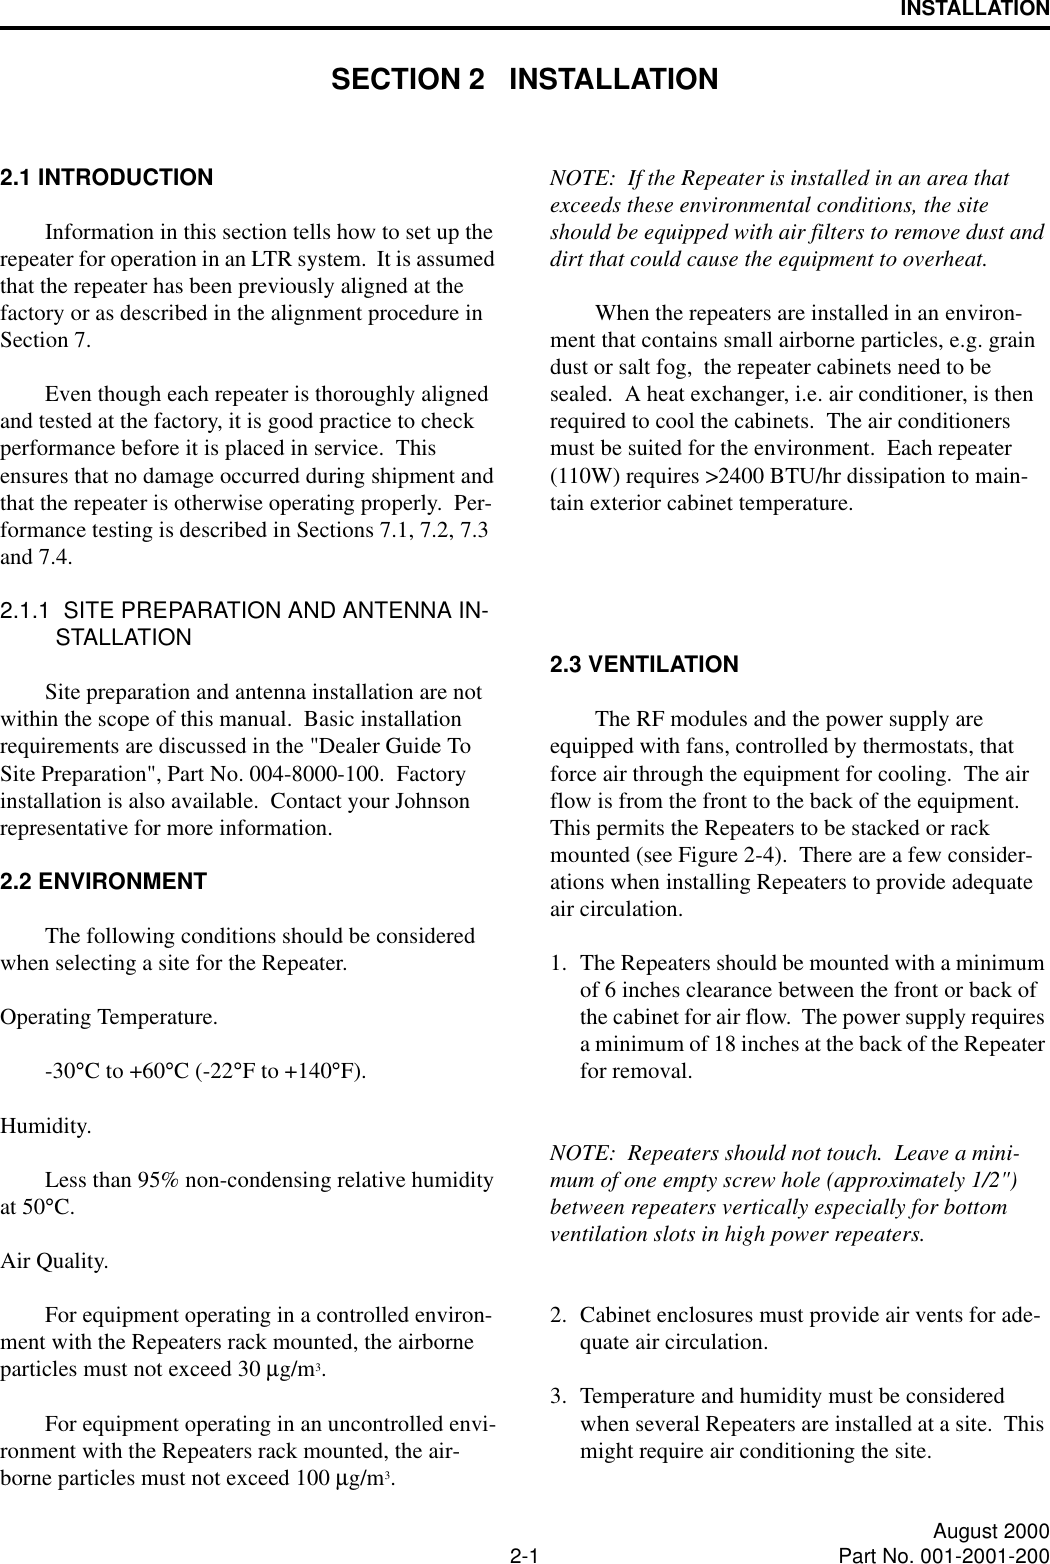 2-1 August 2000Part No. 001-2001-200INSTALLATIONSECTION 2   INSTALLATION2.1 INTRODUCTIONInformation in this section tells how to set up the repeater for operation in an LTR system.  It is assumed that the repeater has been previously aligned at the factory or as described in the alignment procedure in Section 7.Even though each repeater is thoroughly aligned and tested at the factory, it is good practice to check performance before it is placed in service.  This ensures that no damage occurred during shipment and that the repeater is otherwise operating properly.  Per-formance testing is described in Sections 7.1, 7.2, 7.3 and 7.4.2.1.1  SITE PREPARATION AND ANTENNA IN-STALLATIONSite preparation and antenna installation are not within the scope of this manual.  Basic installation requirements are discussed in the &quot;Dealer Guide To Site Preparation&quot;, Part No. 004-8000-100.  Factory installation is also available.  Contact your Johnson representative for more information.2.2 ENVIRONMENTThe following conditions should be considered when selecting a site for the Repeater.Operating Temperature.-30°C to +60°C (-22°F to +140°F).      Humidity.Less than 95% non-condensing relative humidity at 50°C.Air Quality.For equipment operating in a controlled environ-ment with the Repeaters rack mounted, the airborne particles must not exceed 30 µg/m3.For equipment operating in an uncontrolled envi-ronment with the Repeaters rack mounted, the air-borne particles must not exceed 100 µg/m3.NOTE:  If the Repeater is installed in an area that exceeds these environmental conditions, the site should be equipped with air filters to remove dust and dirt that could cause the equipment to overheat.When the repeaters are installed in an environ-ment that contains small airborne particles, e.g. grain dust or salt fog,  the repeater cabinets need to be sealed.  A heat exchanger, i.e. air conditioner, is then required to cool the cabinets.  The air conditioners must be suited for the environment.  Each repeater (110W) requires &gt;2400 BTU/hr dissipation to main-tain exterior cabinet temperature.2.3 VENTILATIONThe RF modules and the power supply are equipped with fans, controlled by thermostats, that force air through the equipment for cooling.  The air flow is from the front to the back of the equipment.  This permits the Repeaters to be stacked or rack mounted (see Figure 2-4).  There are a few consider-ations when installing Repeaters to provide adequate air circulation.1. The Repeaters should be mounted with a minimum of 6 inches clearance between the front or back of the cabinet for air flow.  The power supply requires a minimum of 18 inches at the back of the Repeater for removal.NOTE:  Repeaters should not touch.  Leave a mini-mum of one empty screw hole (approximately 1/2&quot;) between repeaters vertically especially for bottom ventilation slots in high power repeaters.2. Cabinet enclosures must provide air vents for ade-quate air circulation.3. Temperature and humidity must be considered when several Repeaters are installed at a site.  This might require air conditioning the site.